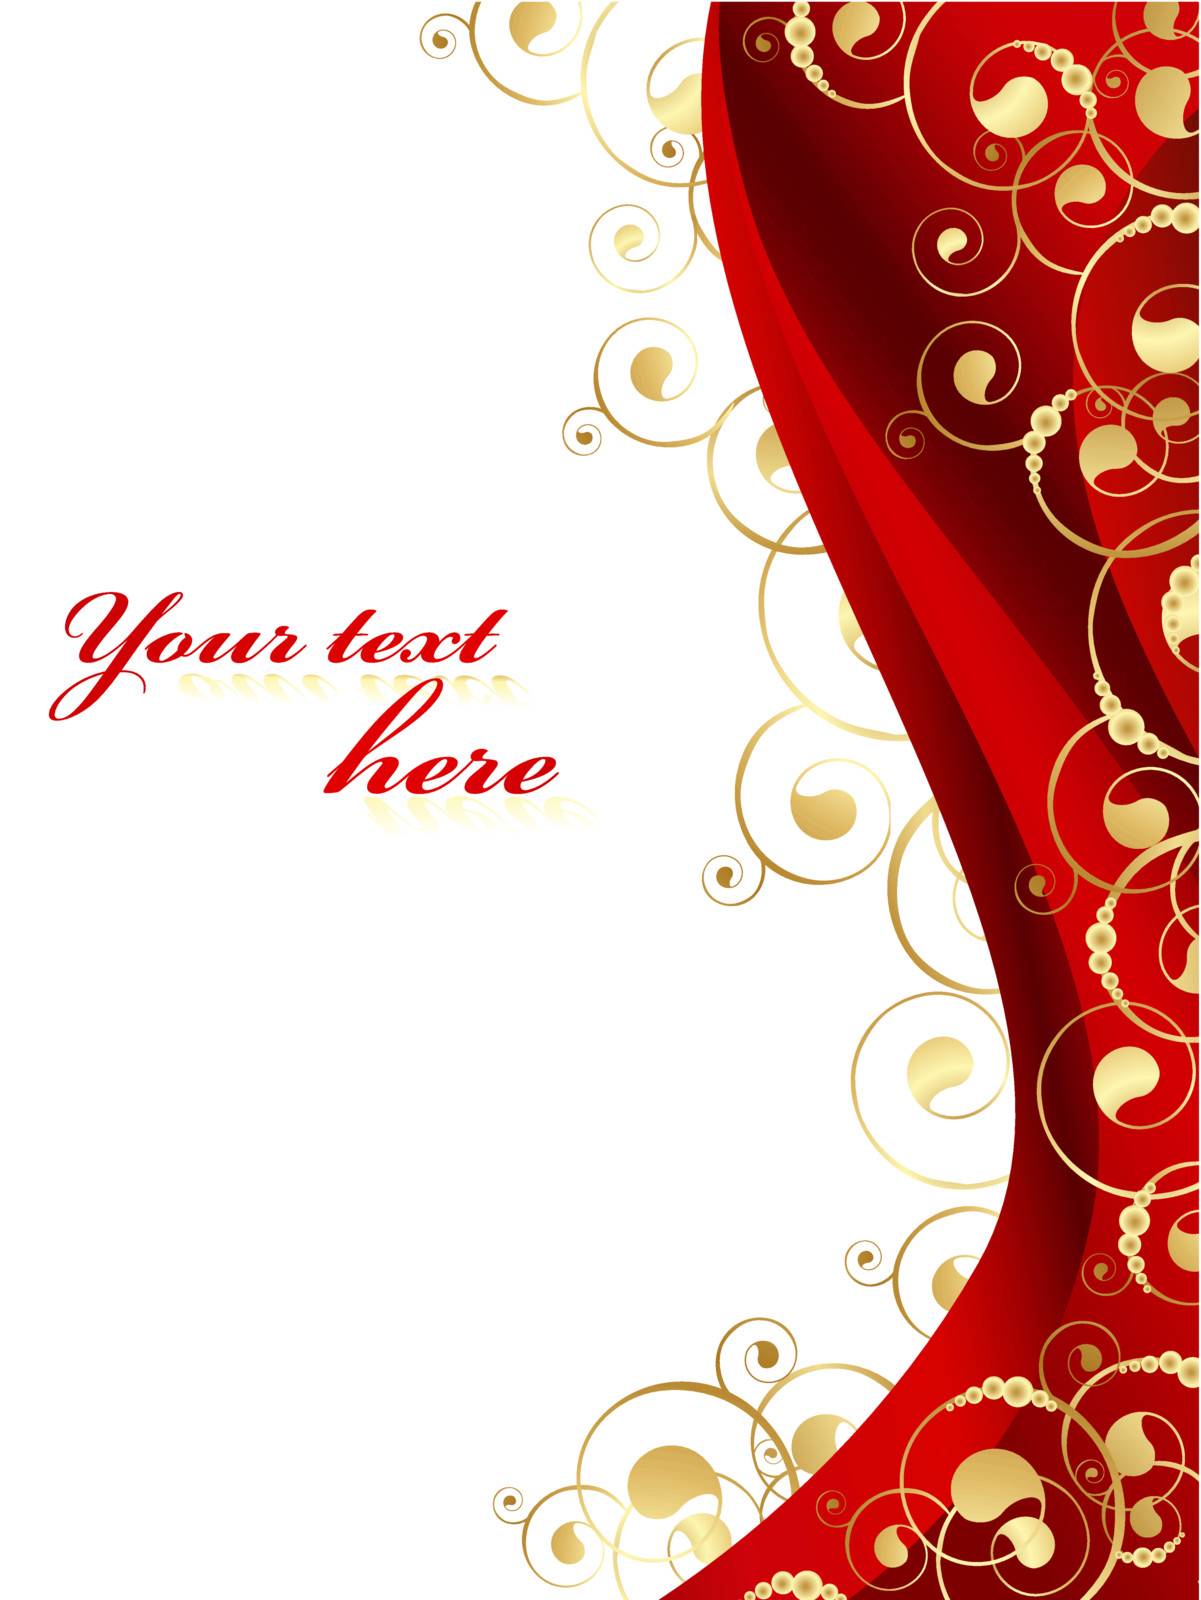 Illustration of the decorated frame in red and gold with swirls and copyspace for your text